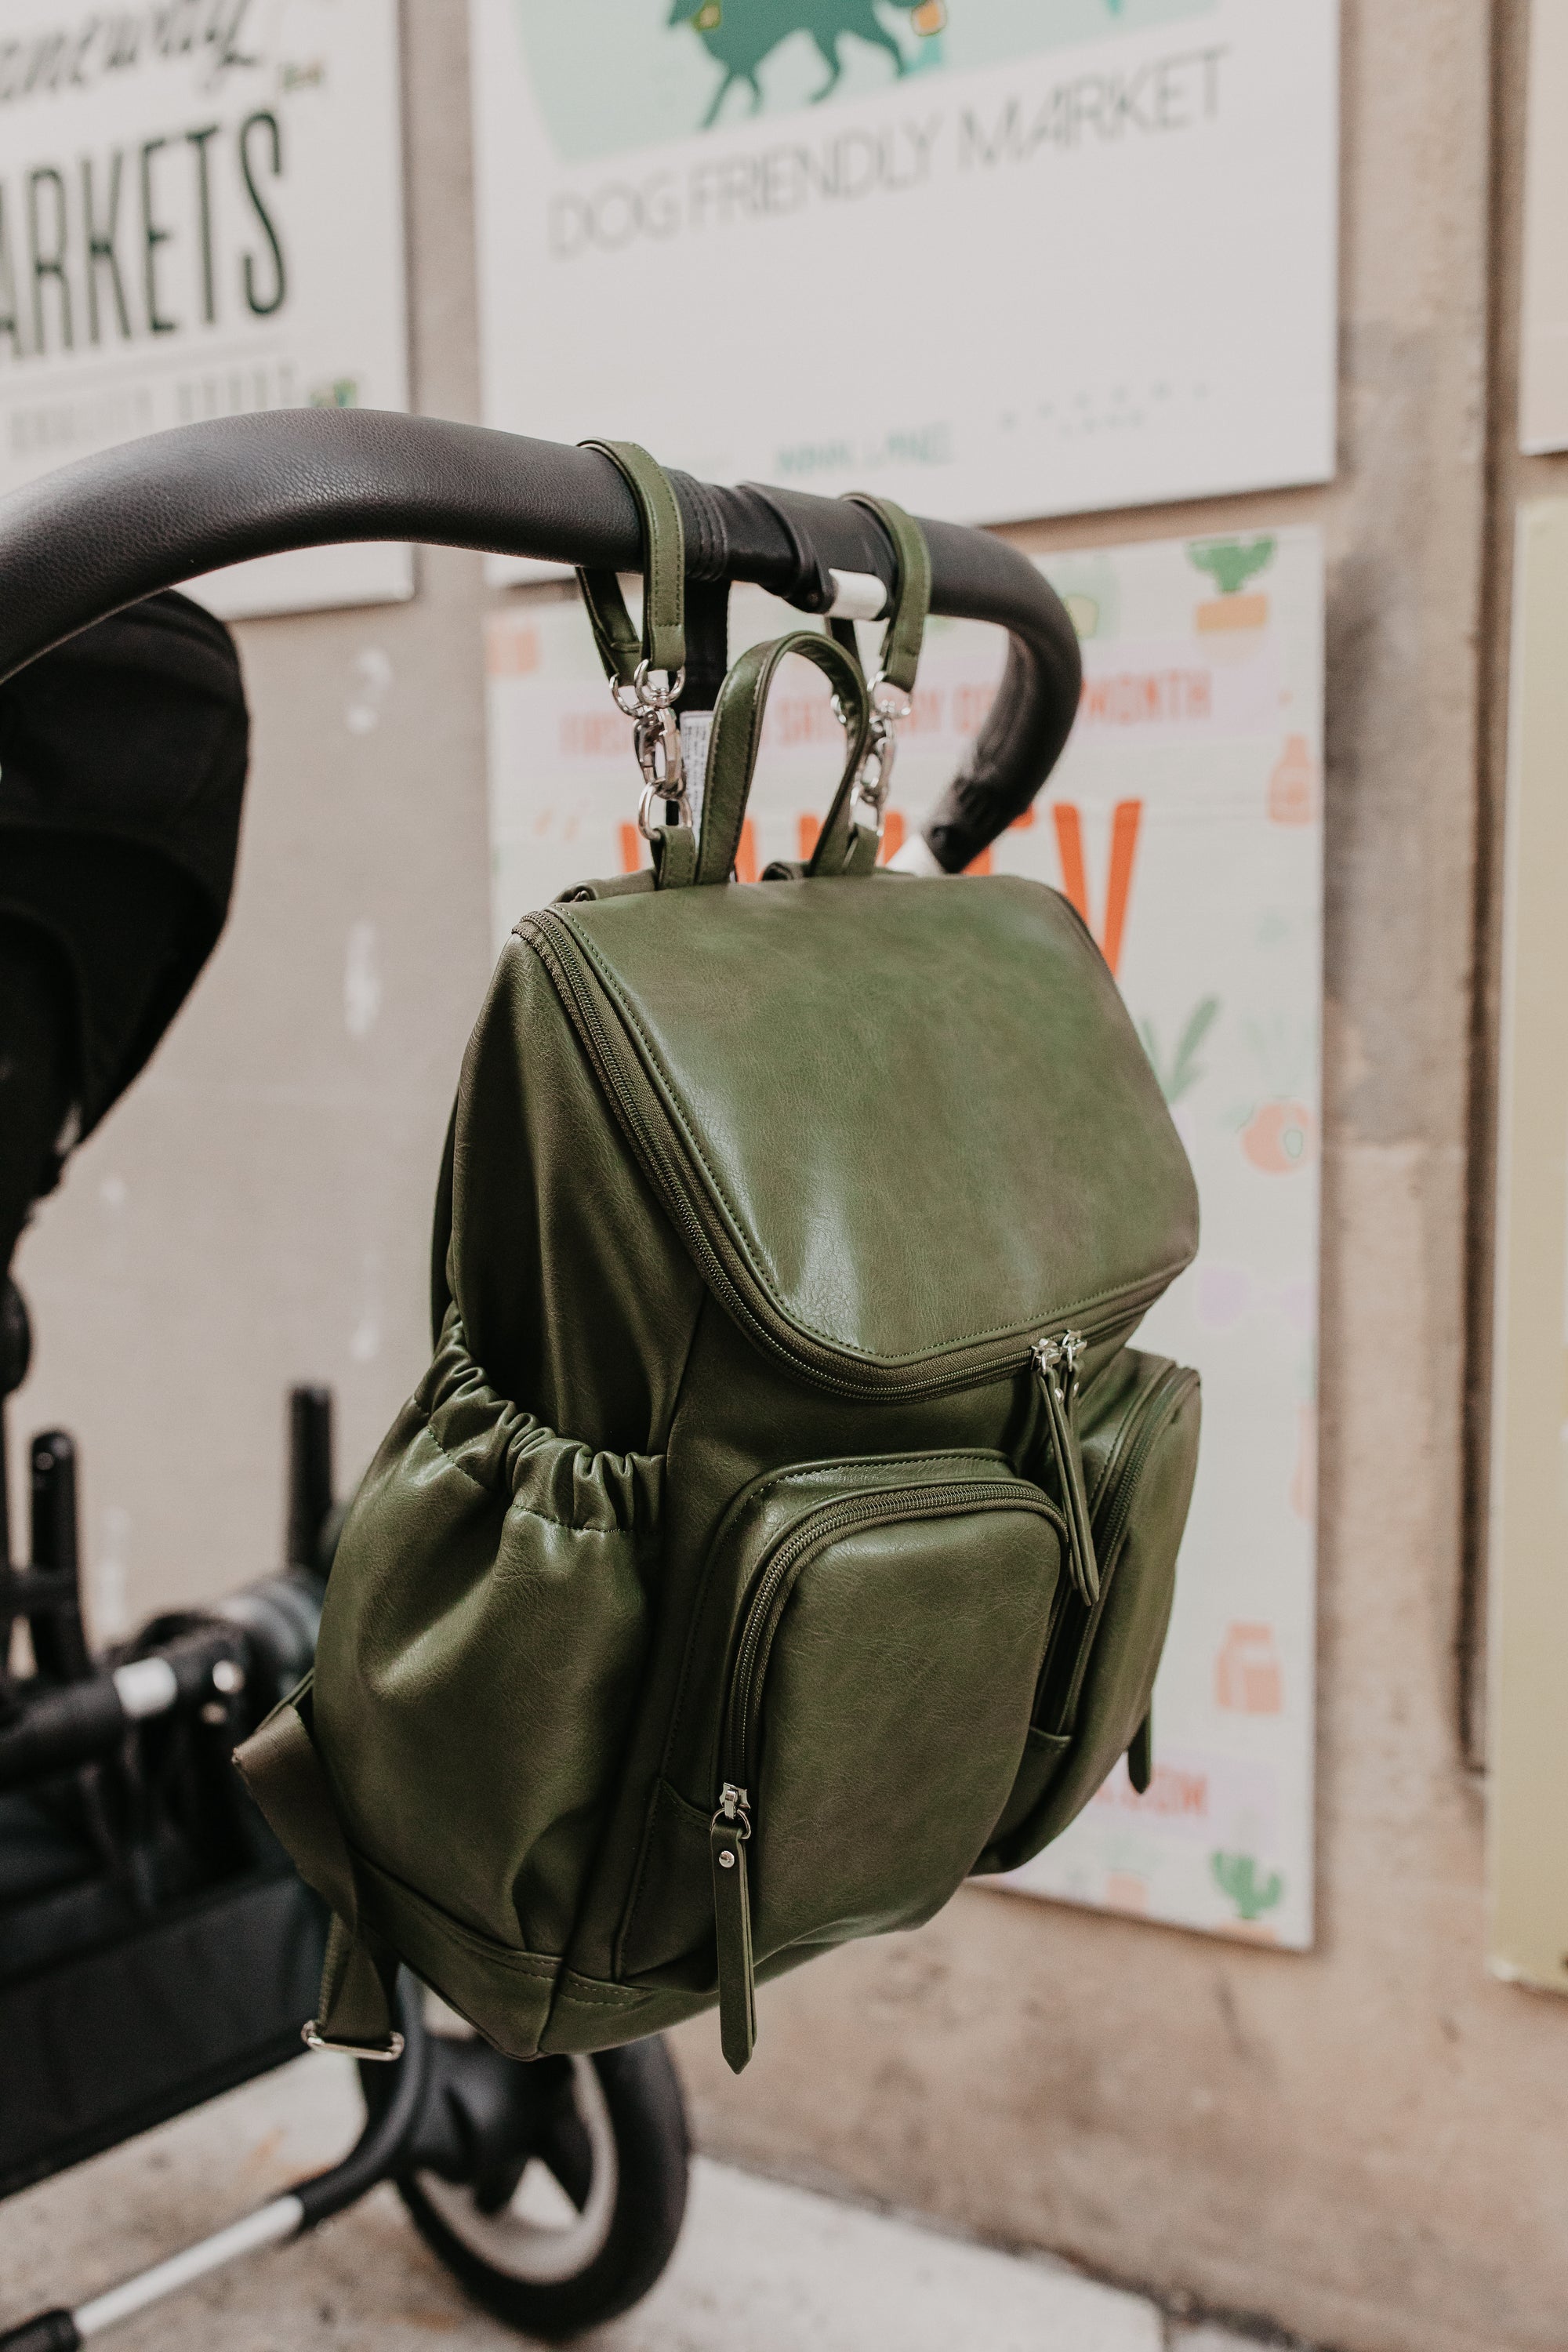 Oioi olive backpack - angus and dudley